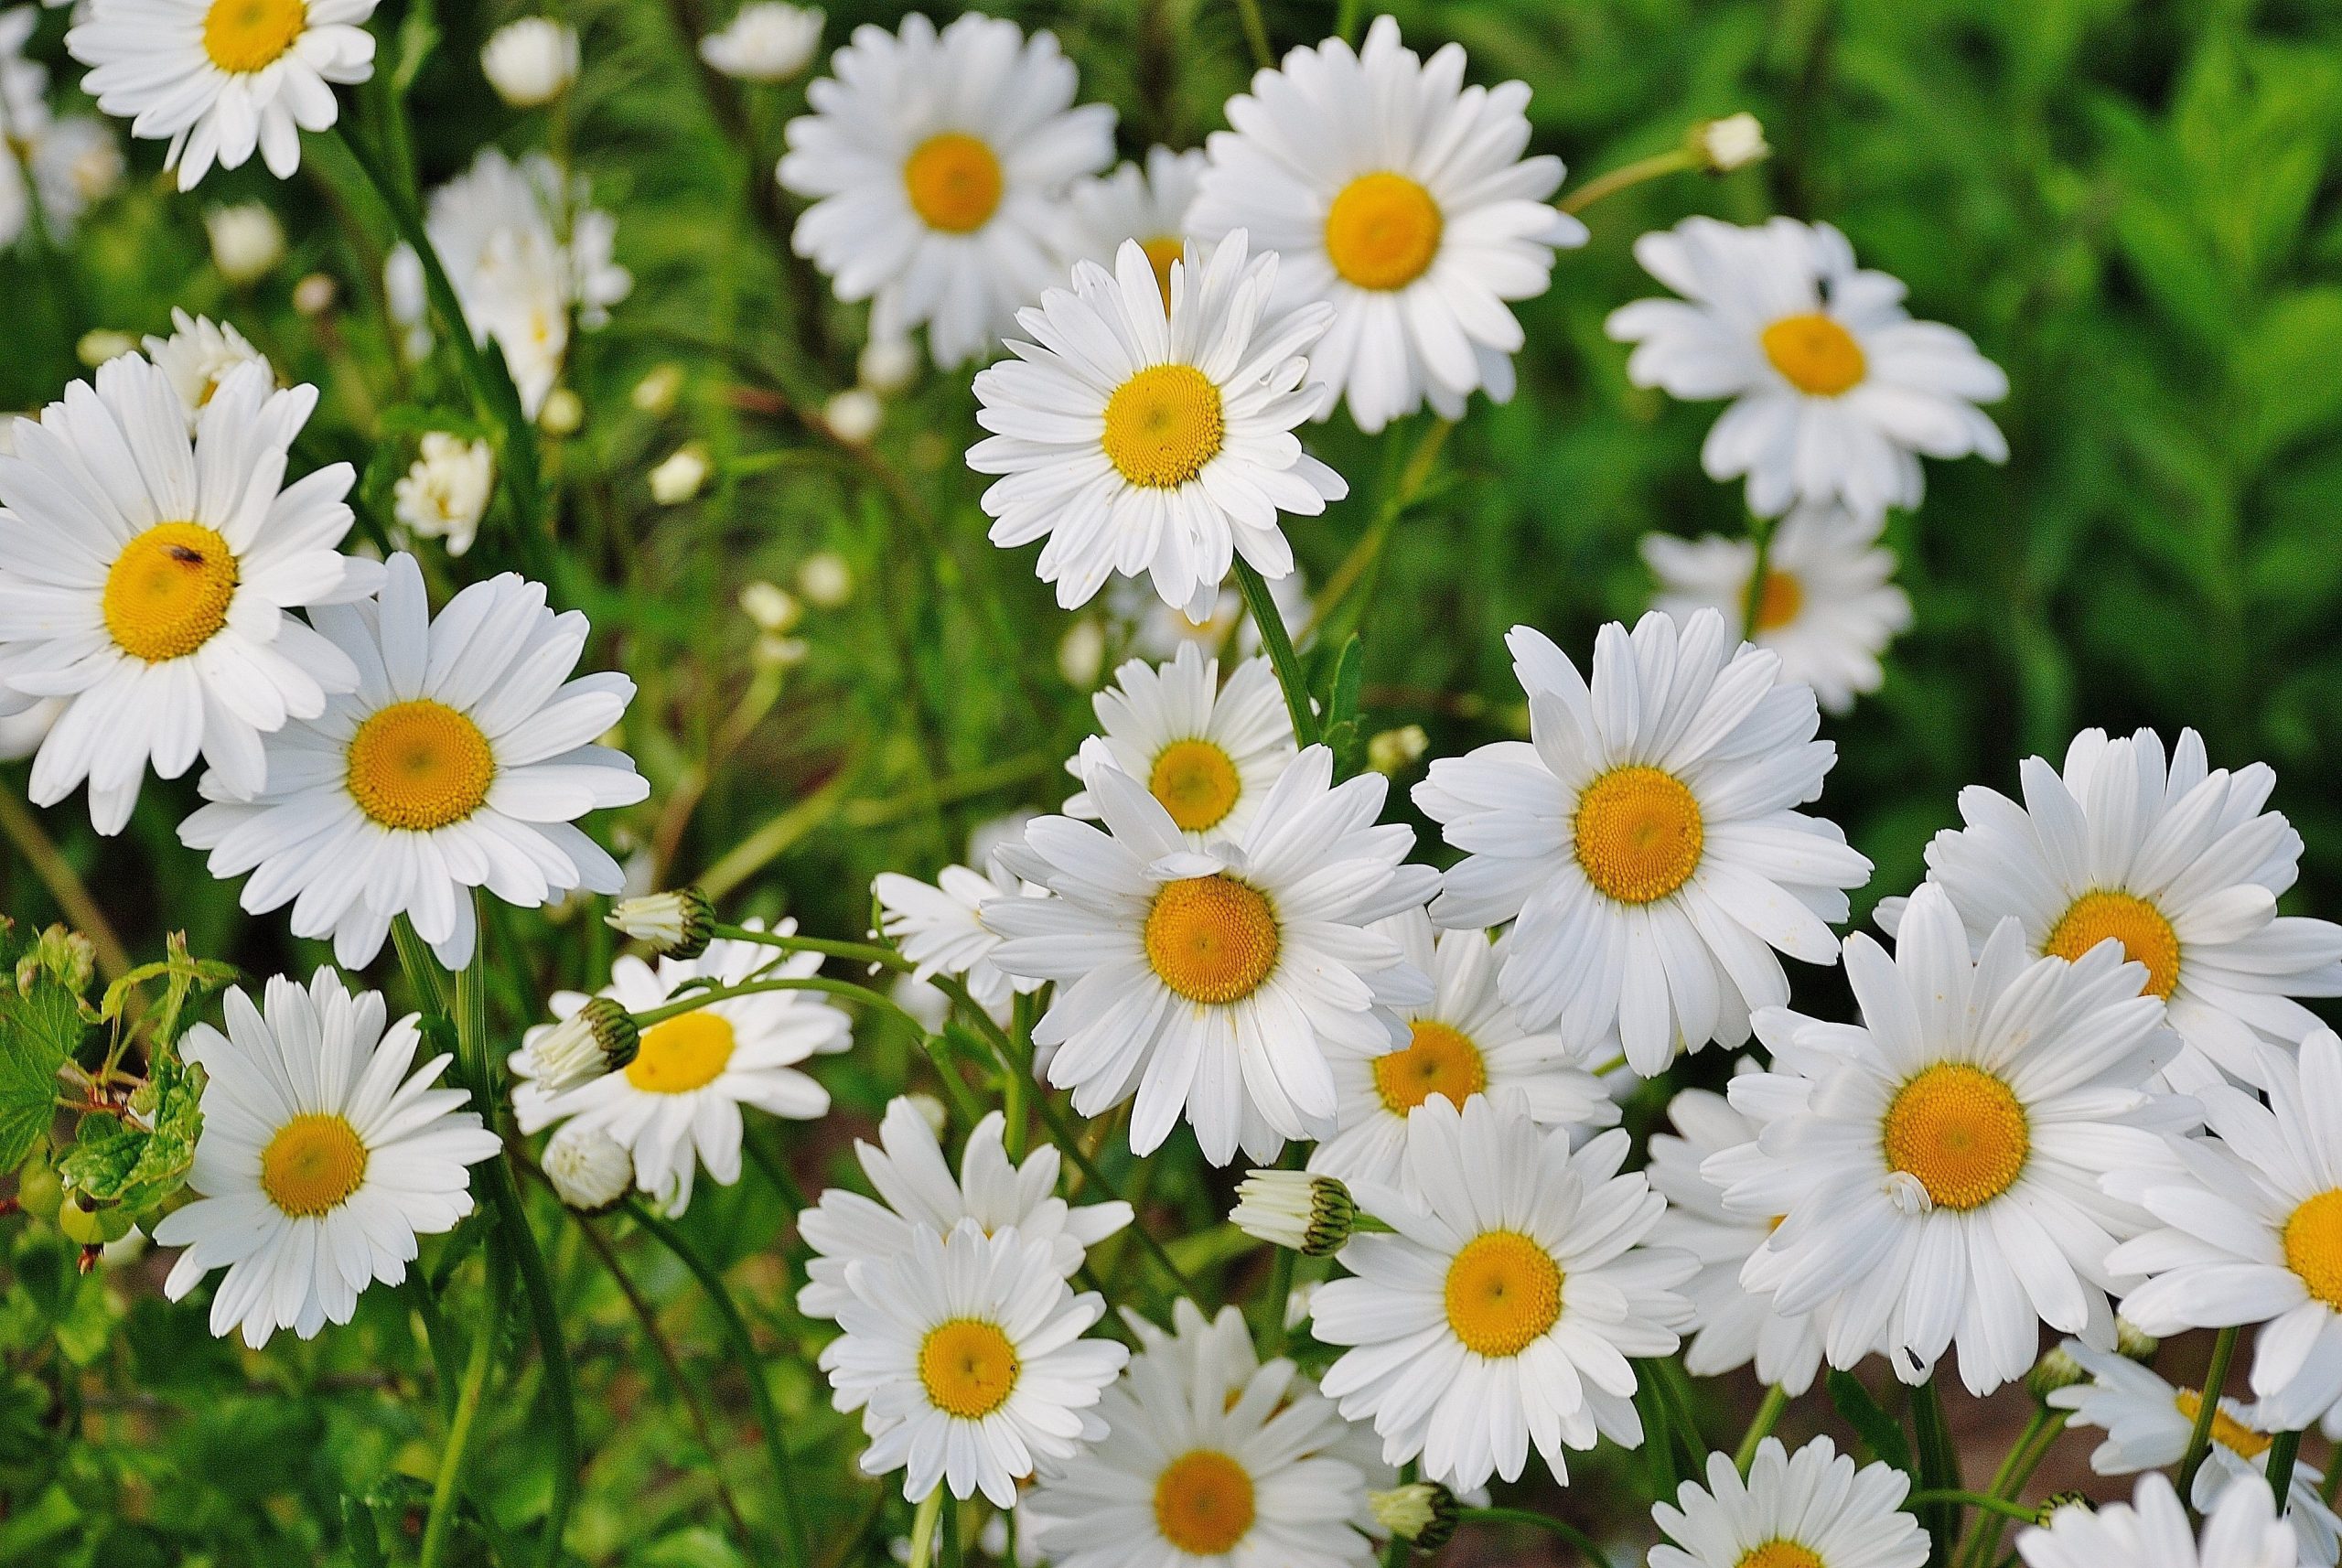 A bright cluster of daisies.